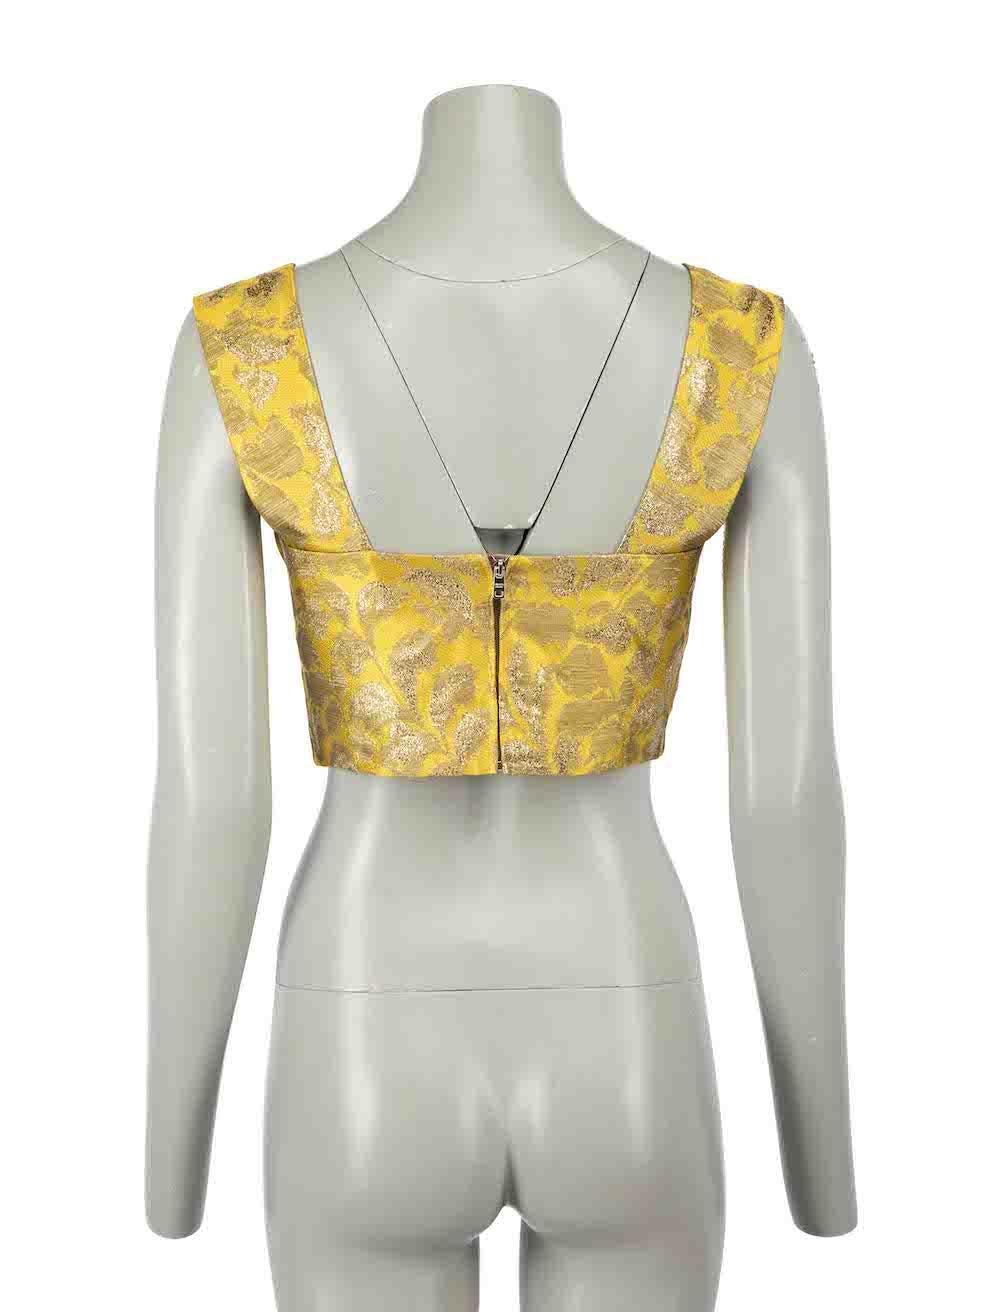 Prada Yellow Metallic Floral Jacquard Crop Top Size S In Good Condition For Sale In London, GB